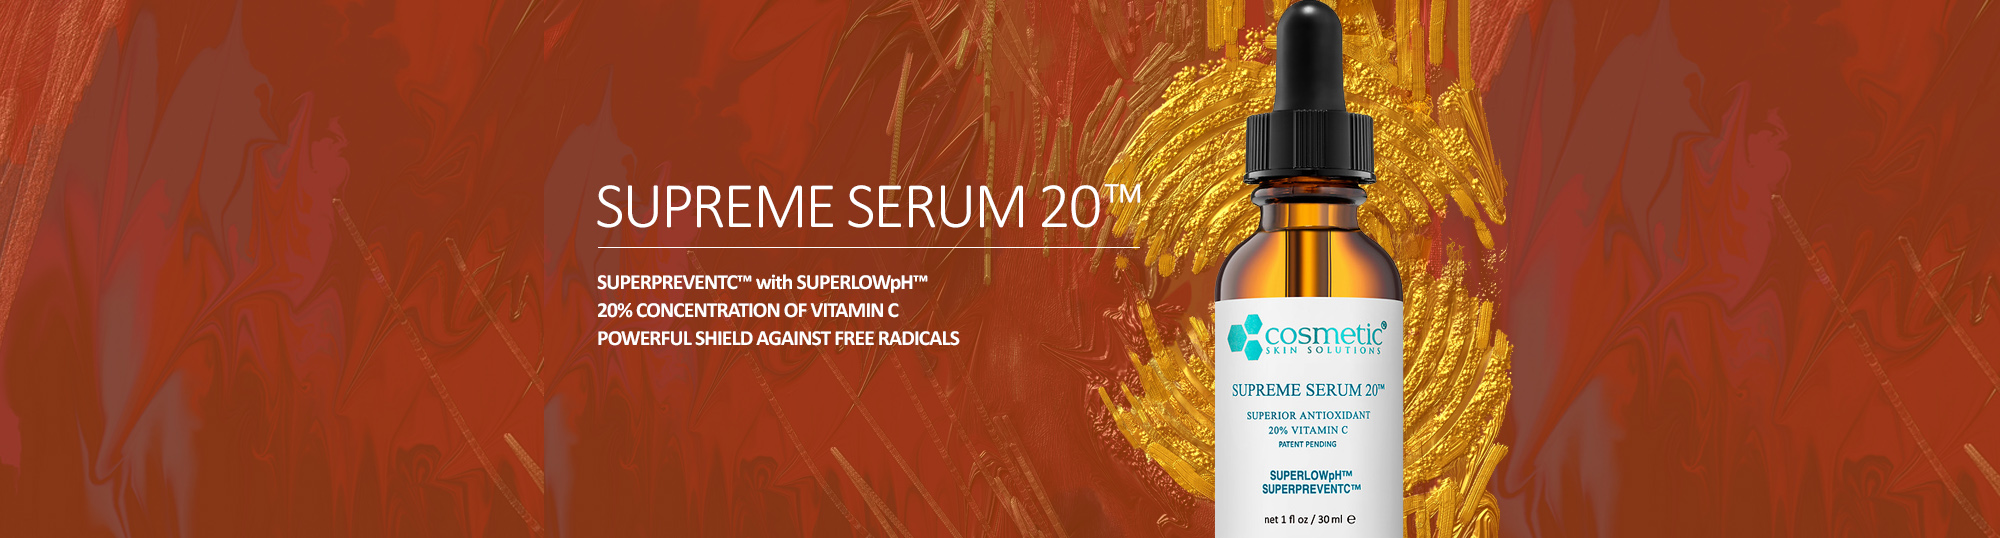 Supreme Serum 20 banner - SUPERPREVENTIC™ With SUPERLOWpH™ 20% Concentration Of Vitamin C Powerful Shield Against Free Radicals